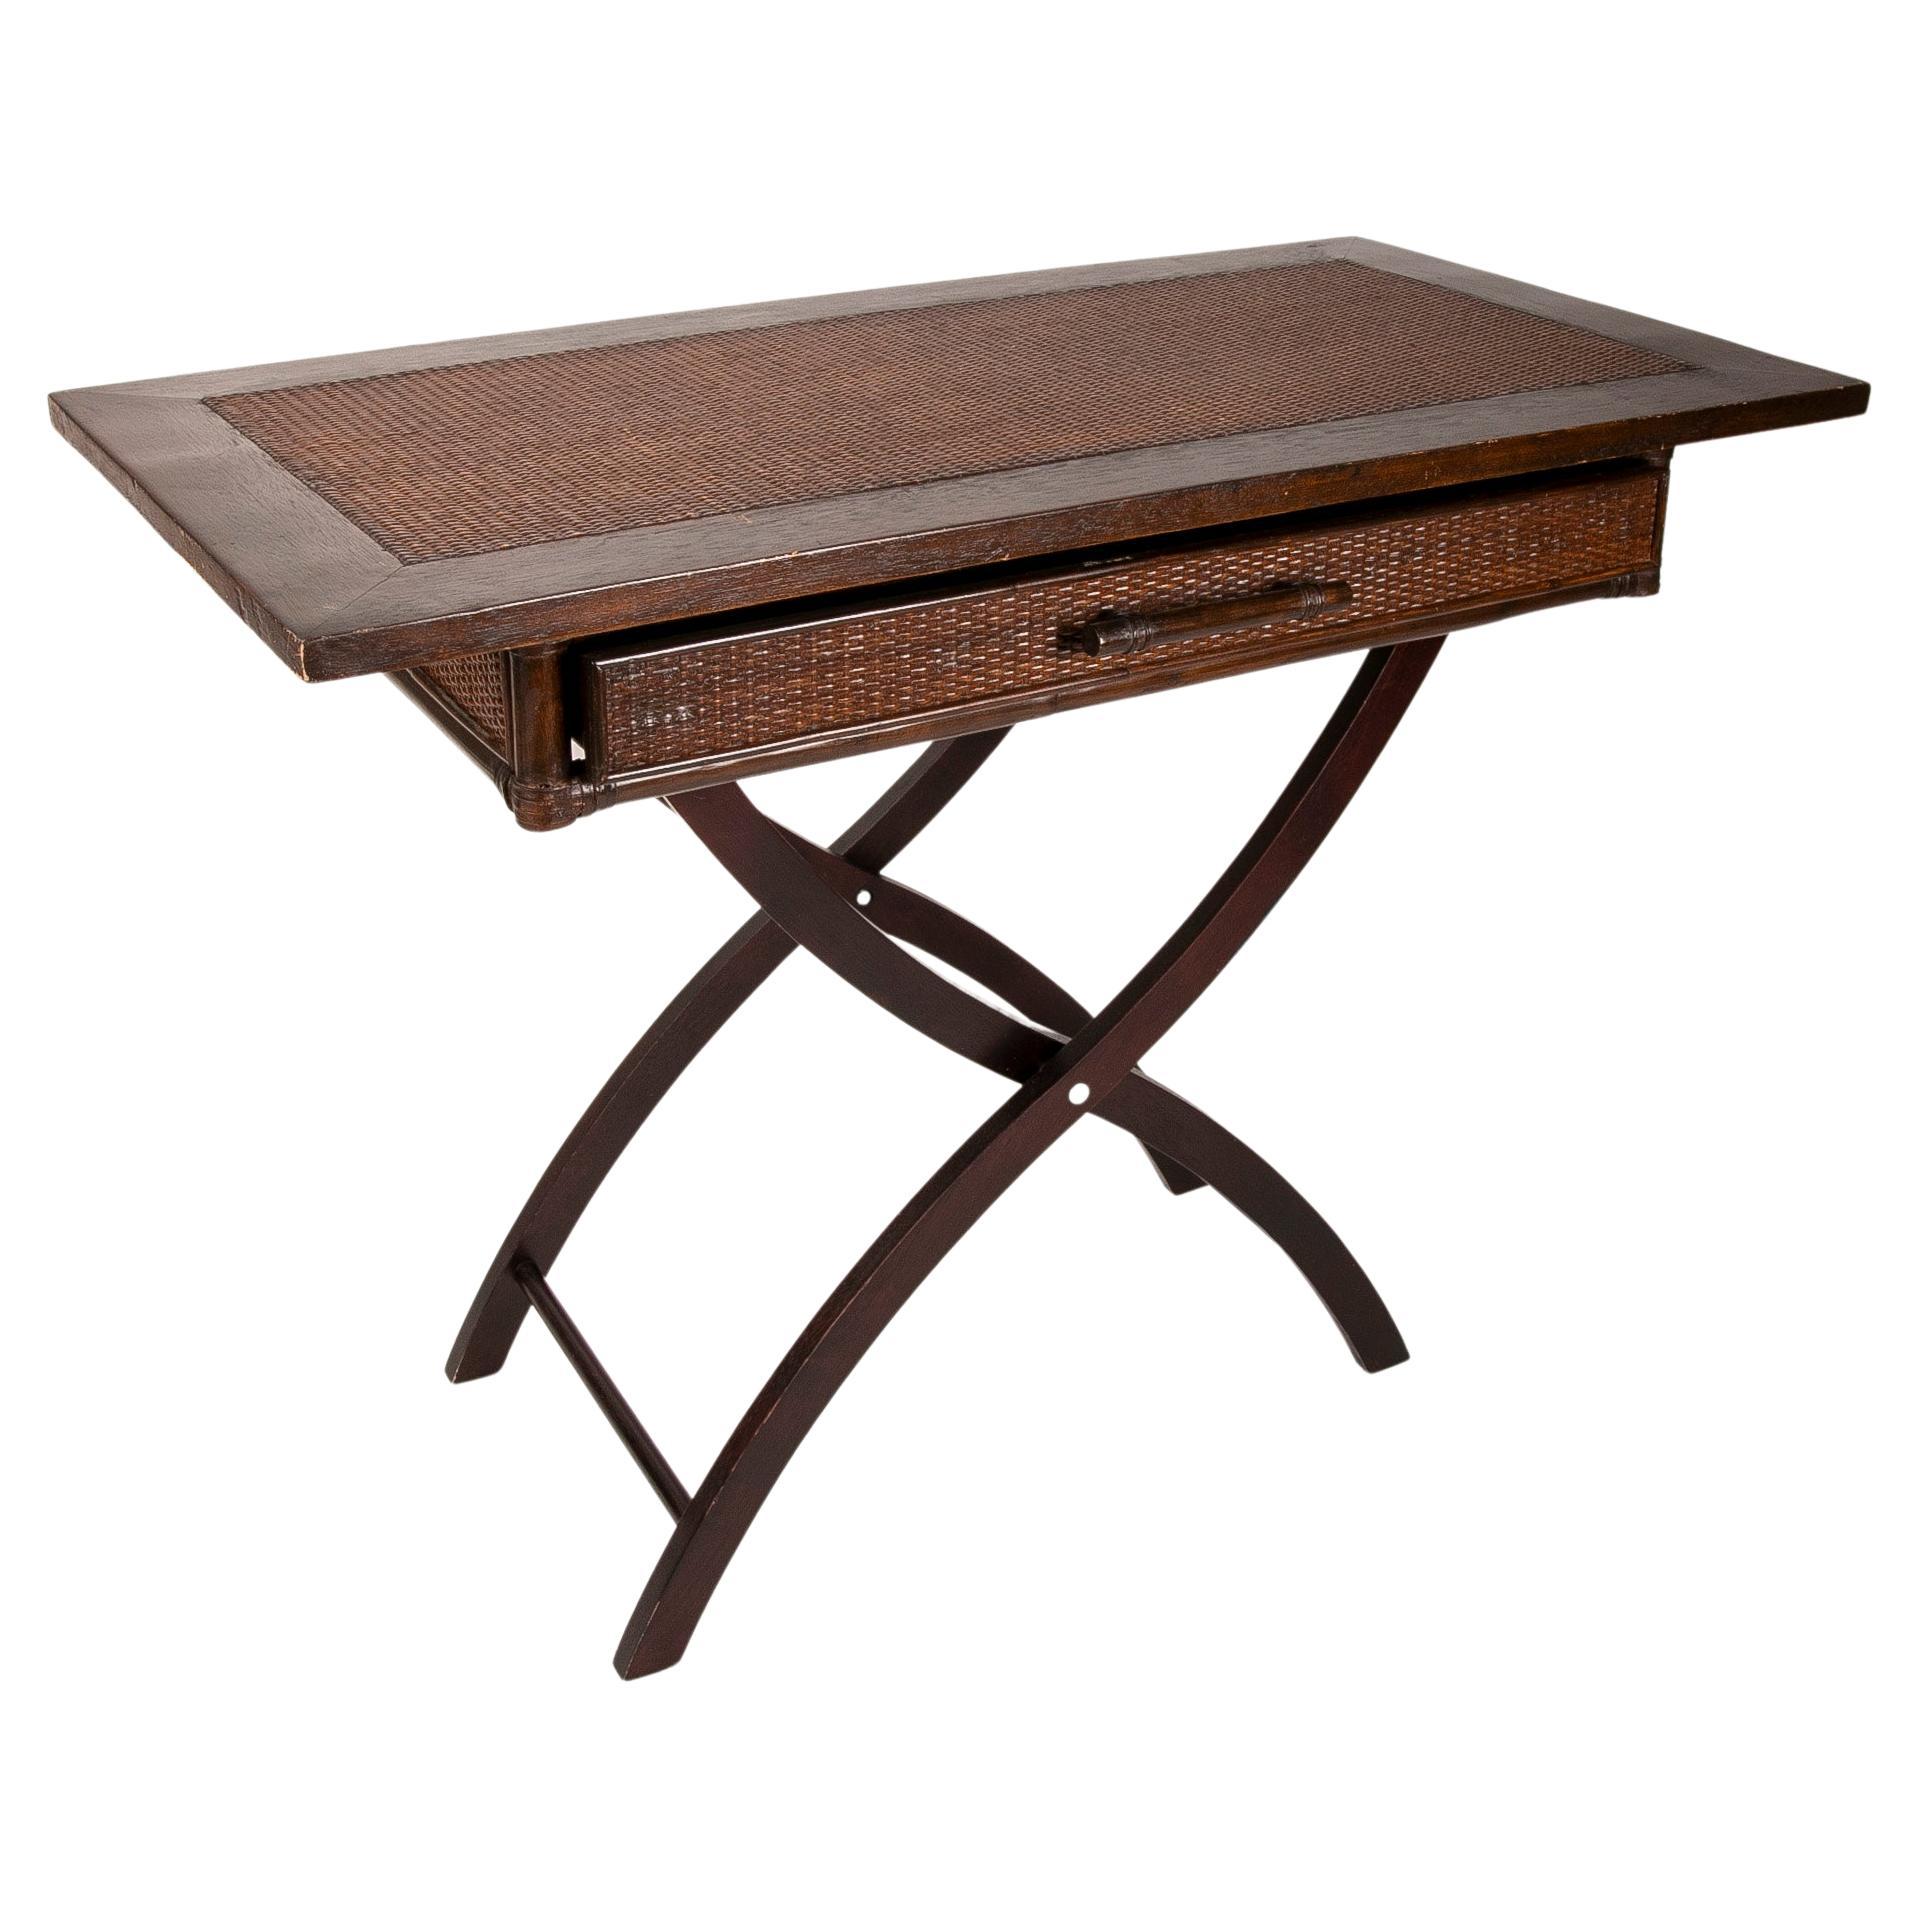 Wooden and Wicker Folding Table with Frontal Drawer